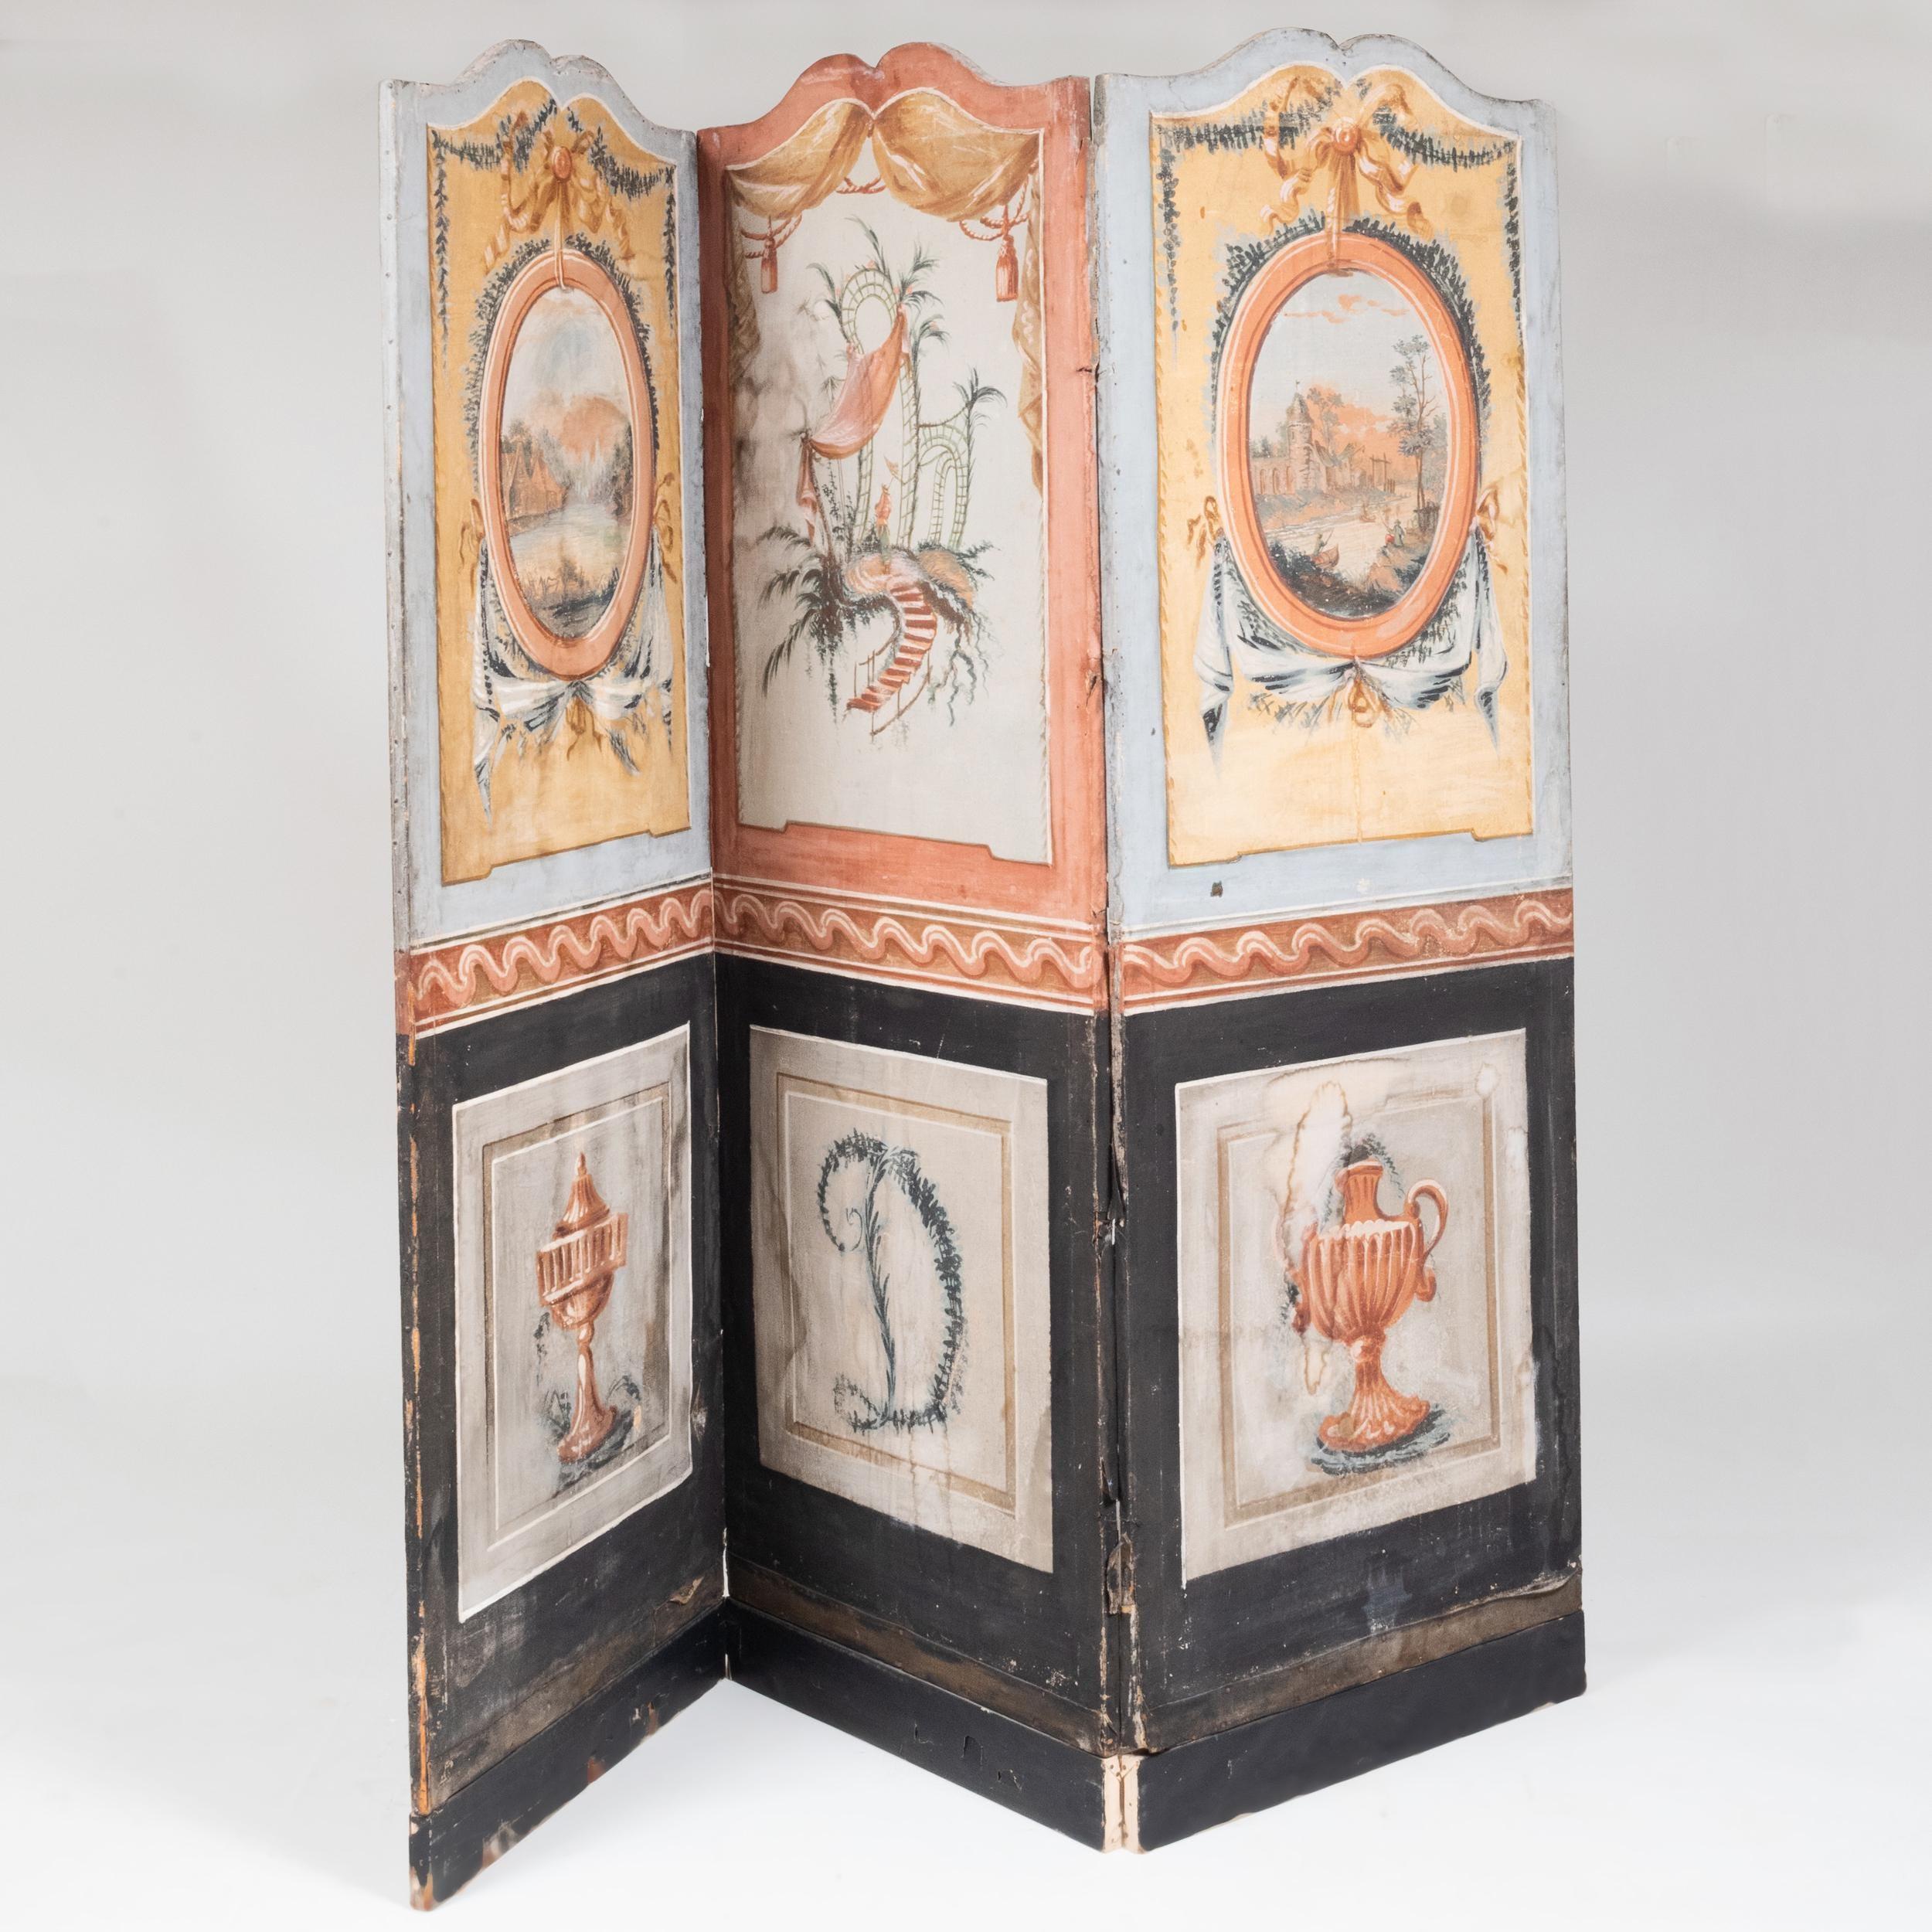 A charming and colorful hand painted 3-panel canvas folding screen on a wood frame, French Louis XV Period, circa 1760, the outer panels painted with idyllic landscapes above lower panels depicting classical urns. The center panel depicts a Chinoise